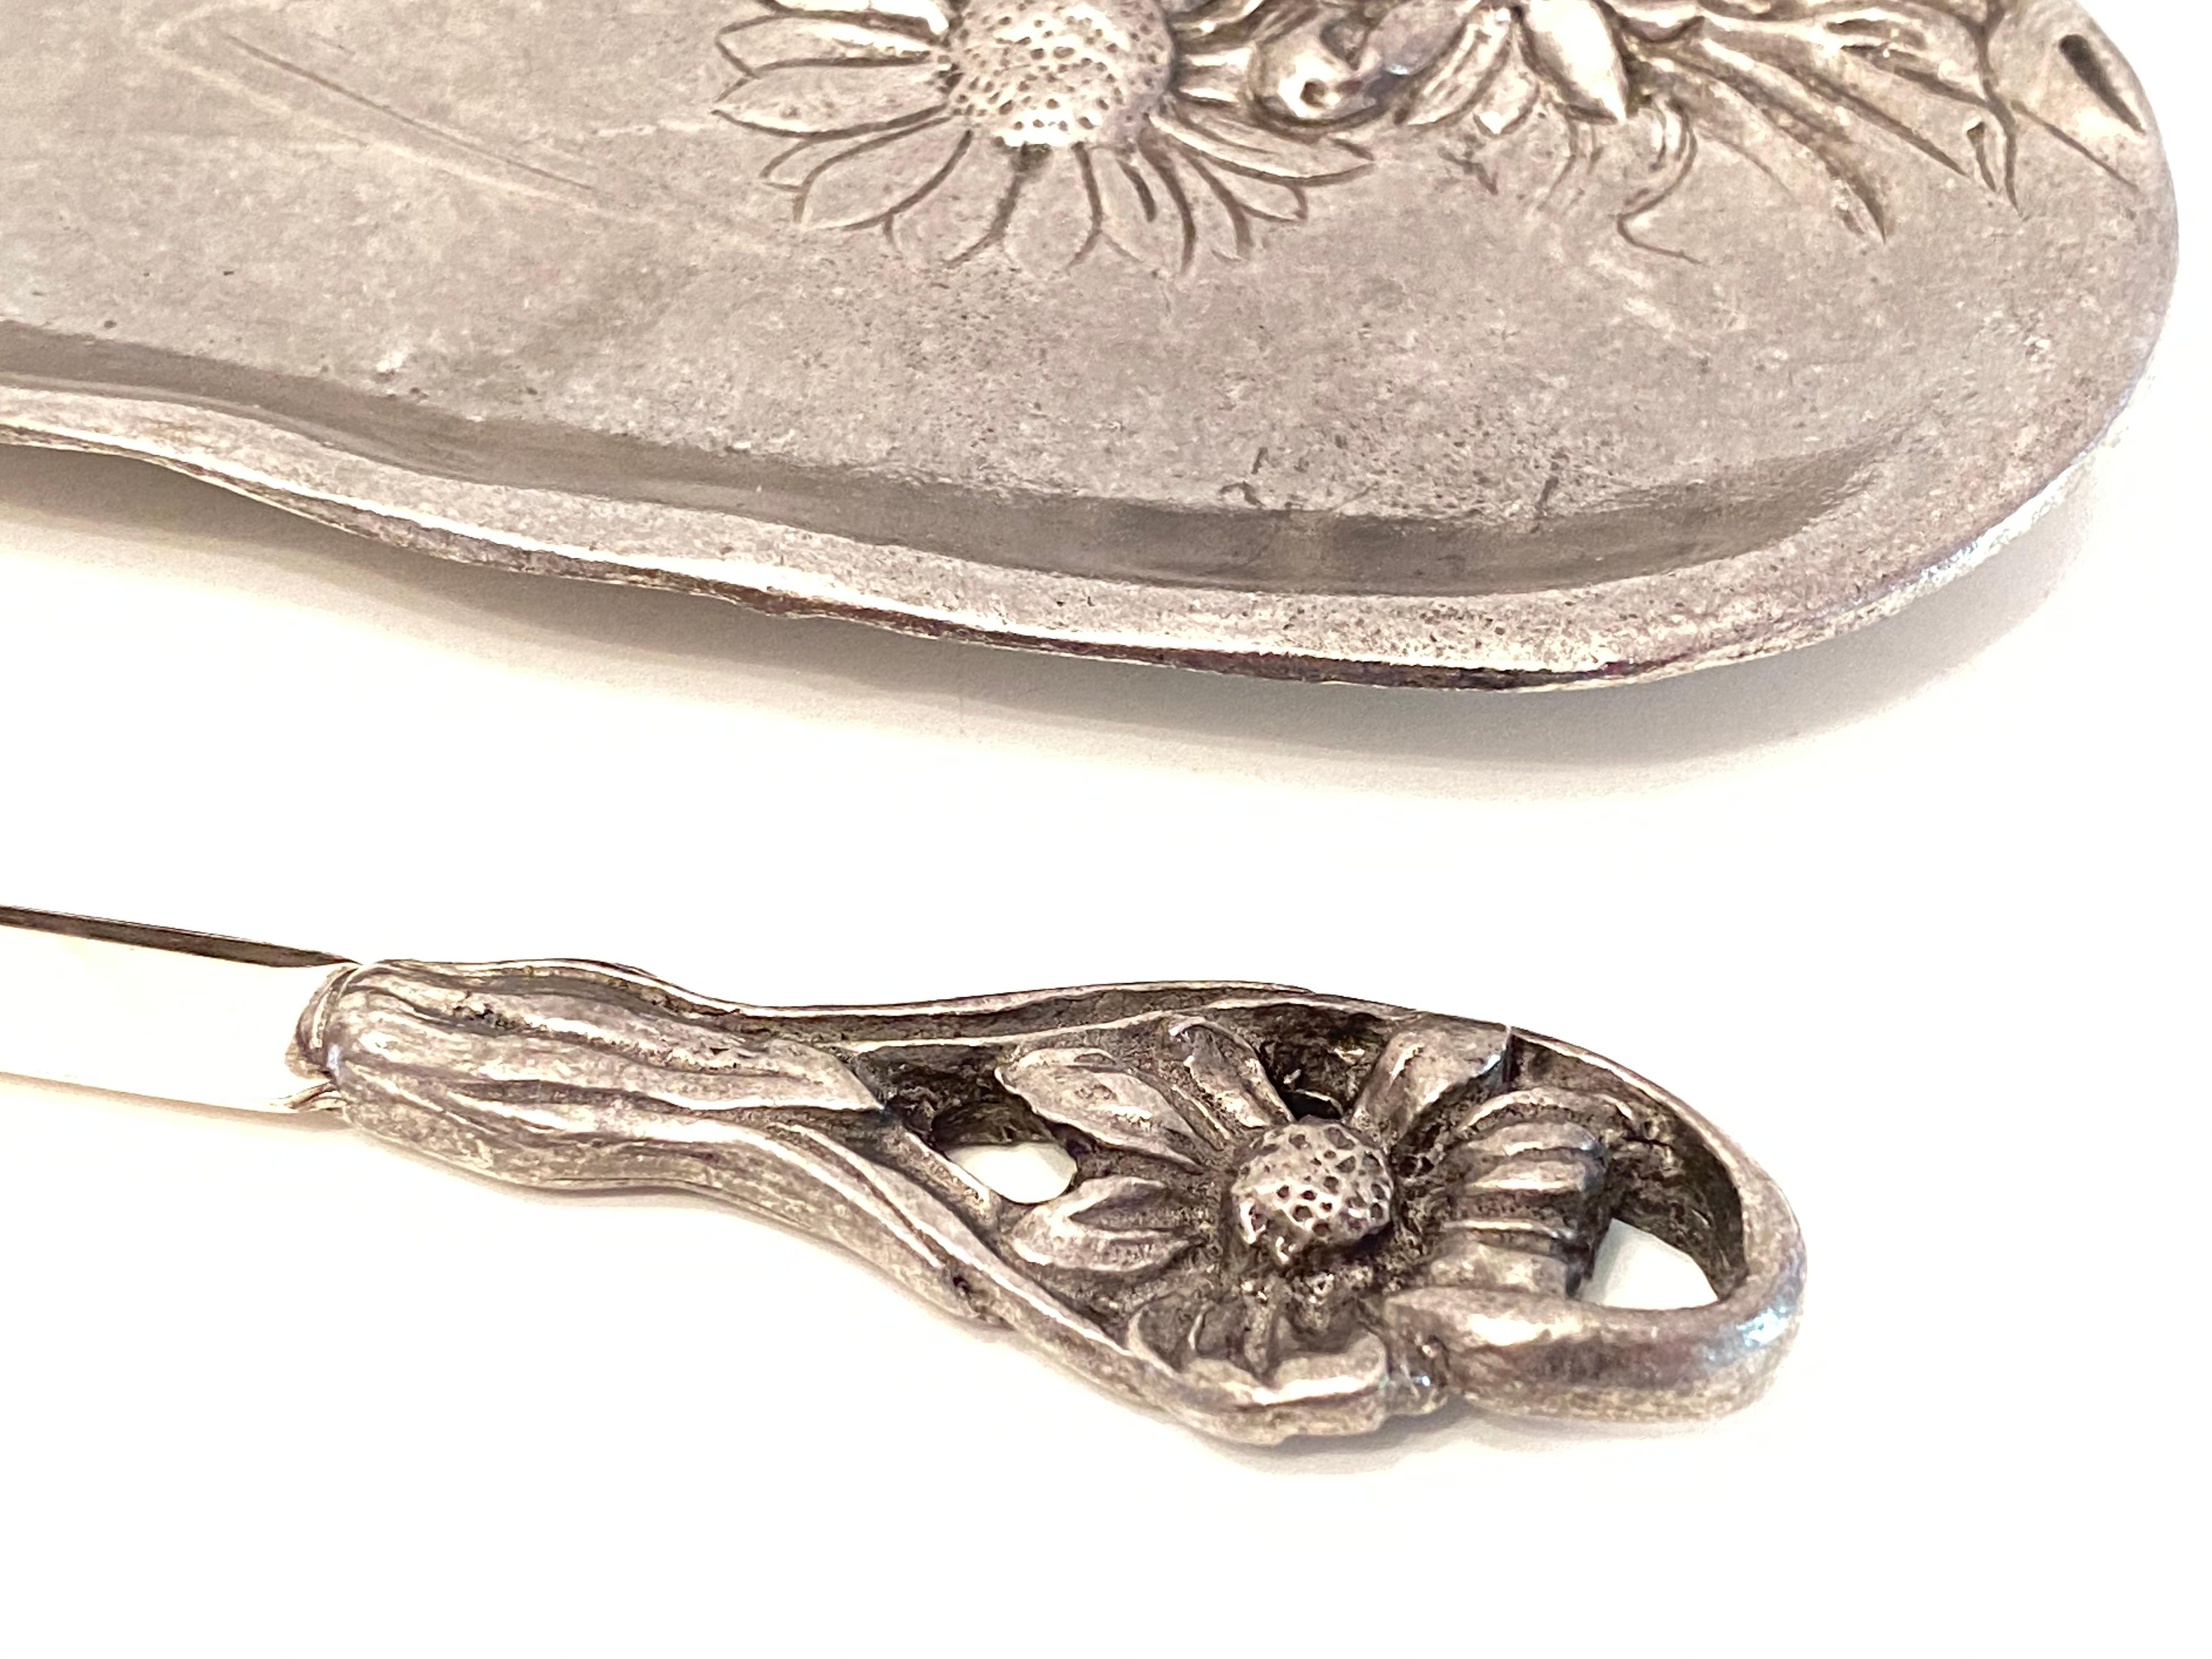 This lovely piece is typical 1950s or older. A catchall and a letter opener for your desk. Made of 95% pewter. The set is in very good condition and a nice patina. There are no damages. A nice addition to your collection or just to display it at